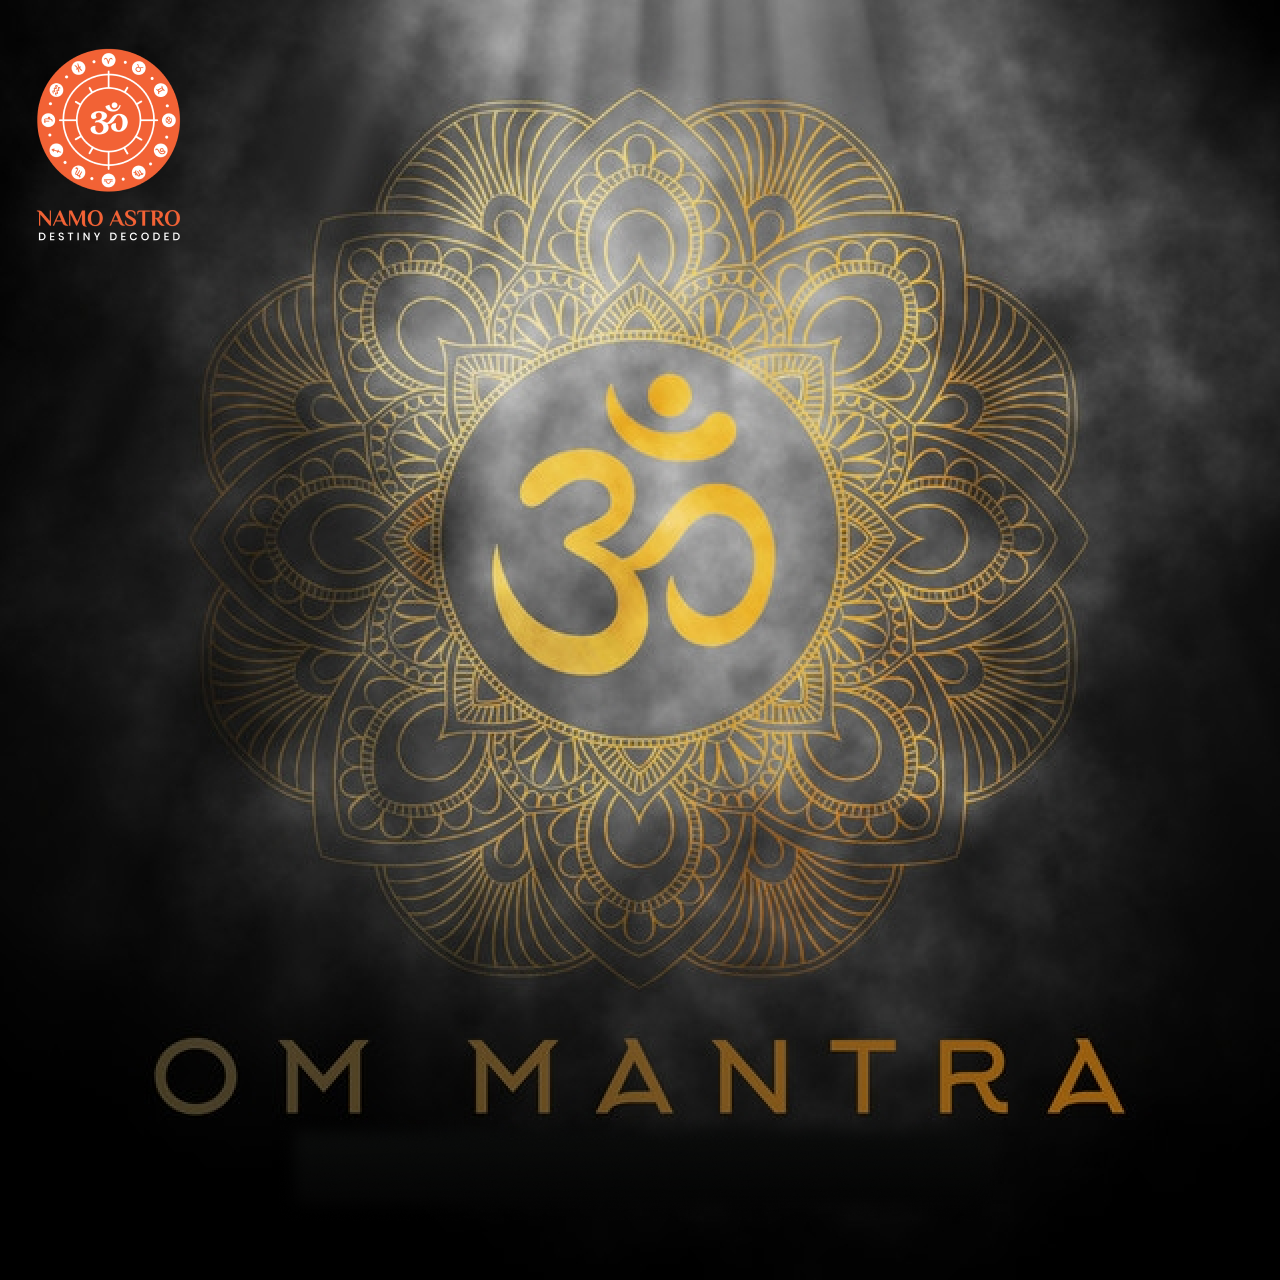 Meaning of OM